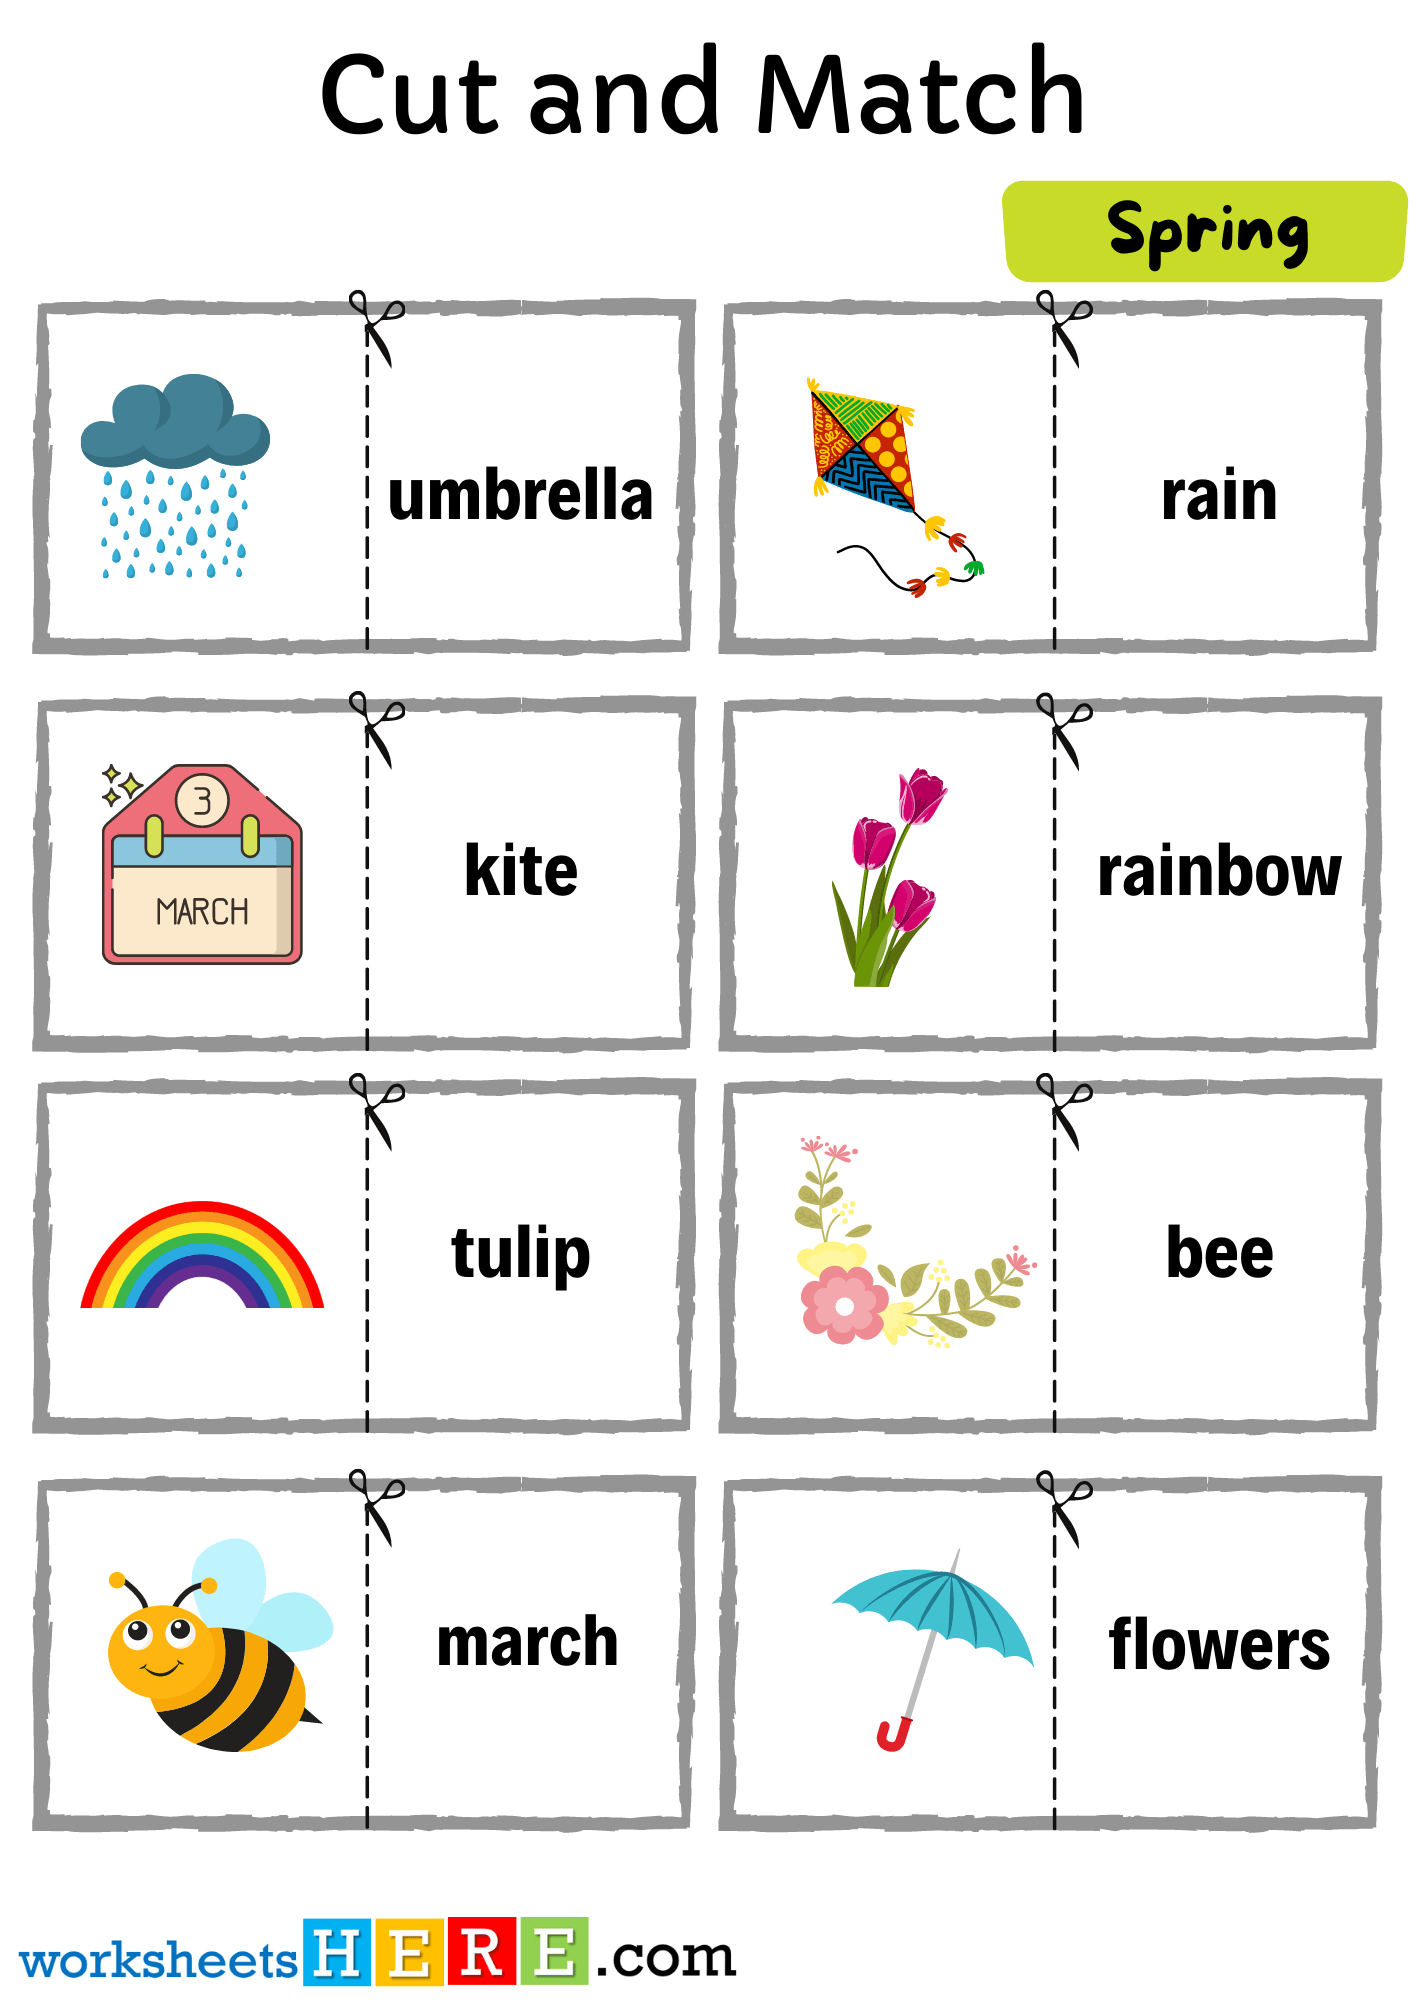 Cut and Match Spring Words with Pictures Activity Worksheets For Kids